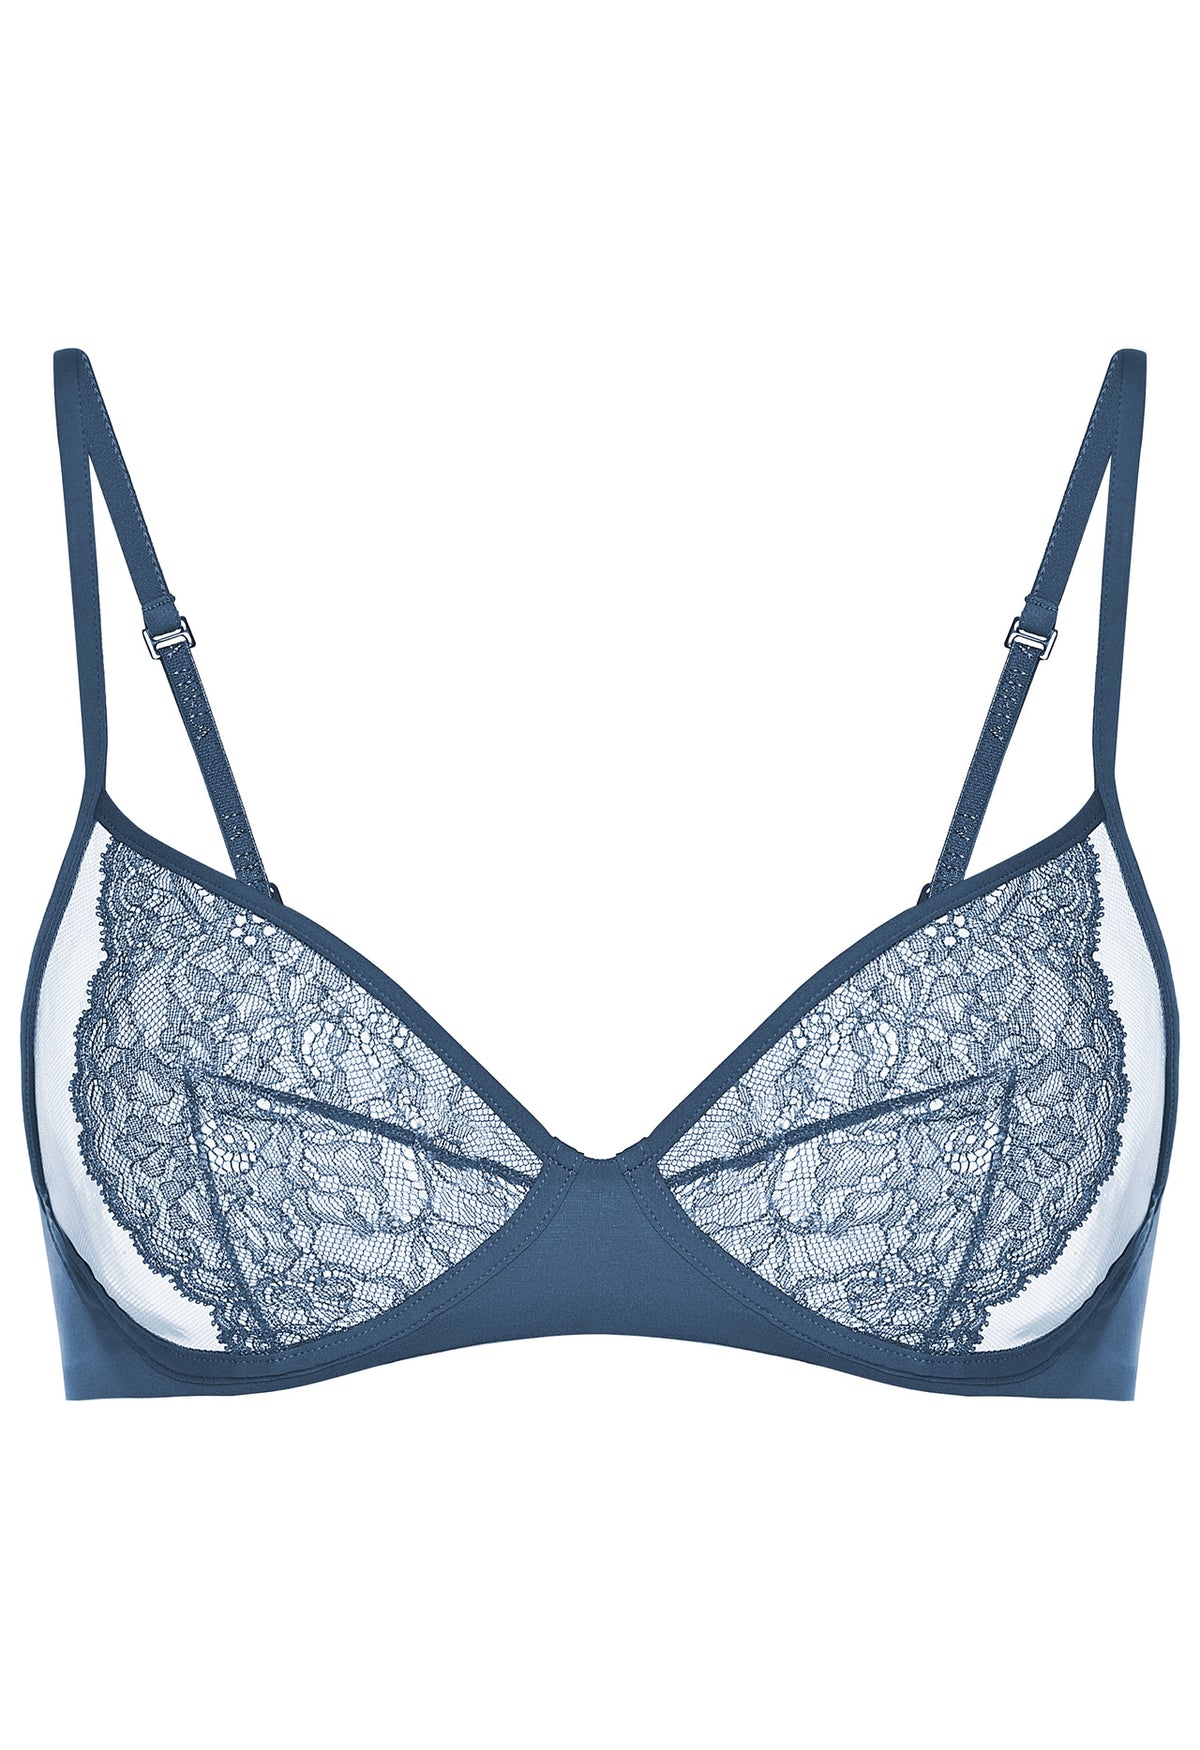 Blue Leavers lace non-wired bra